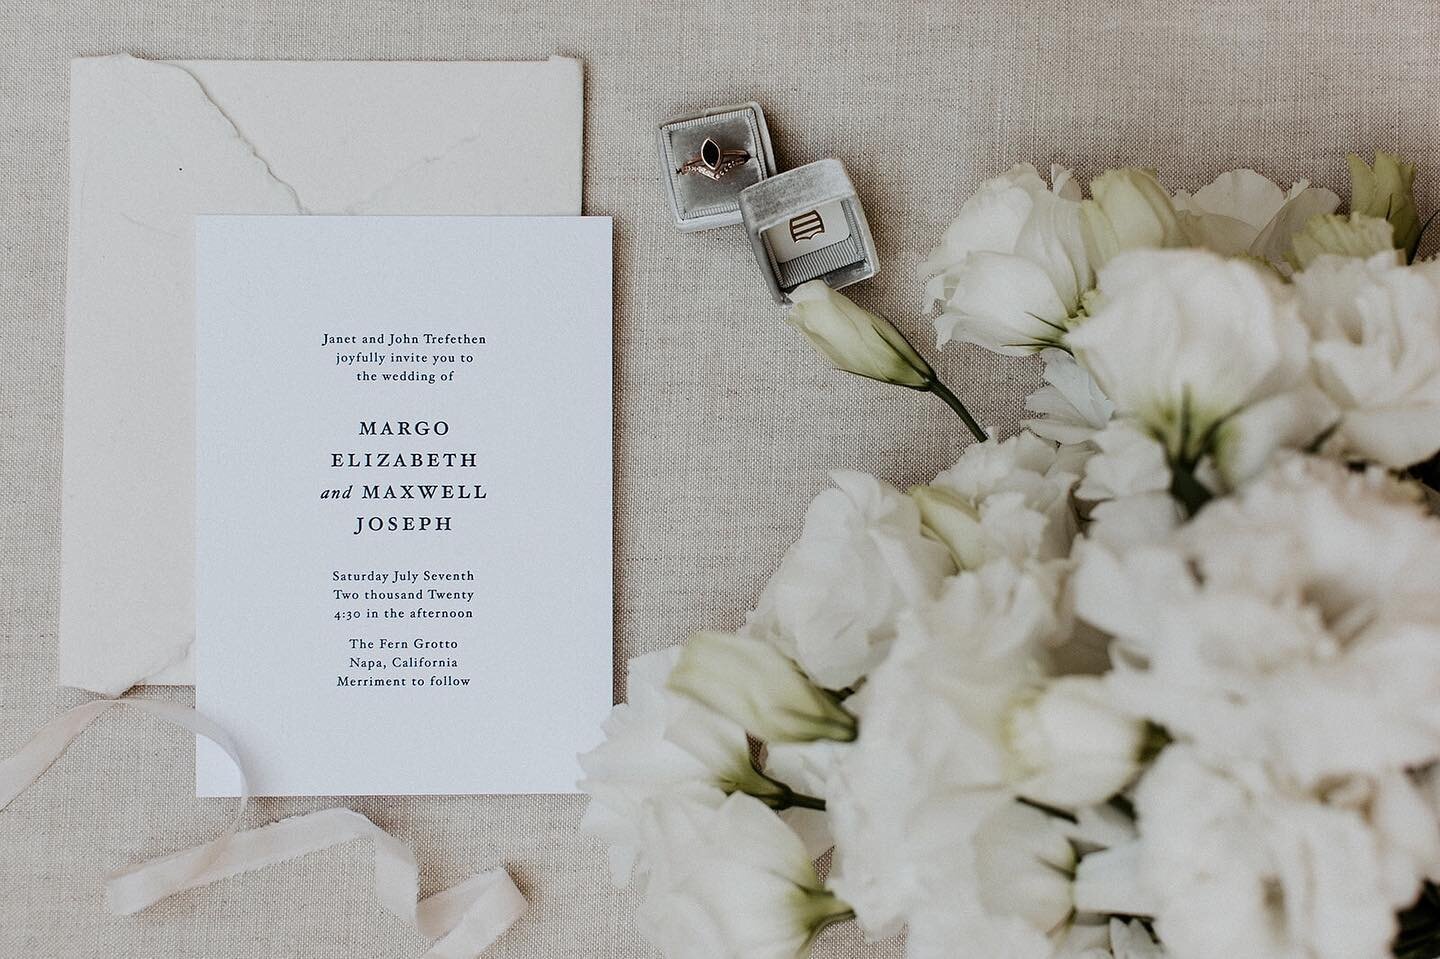 We&rsquo;re all about the simple, letterpress invitation. This one is designed by @libbytipton and available to purchase as a semi-custom suite through @inkypress website.
Photography: @allisonharp 
Planning, design, and florals: @julietandlou